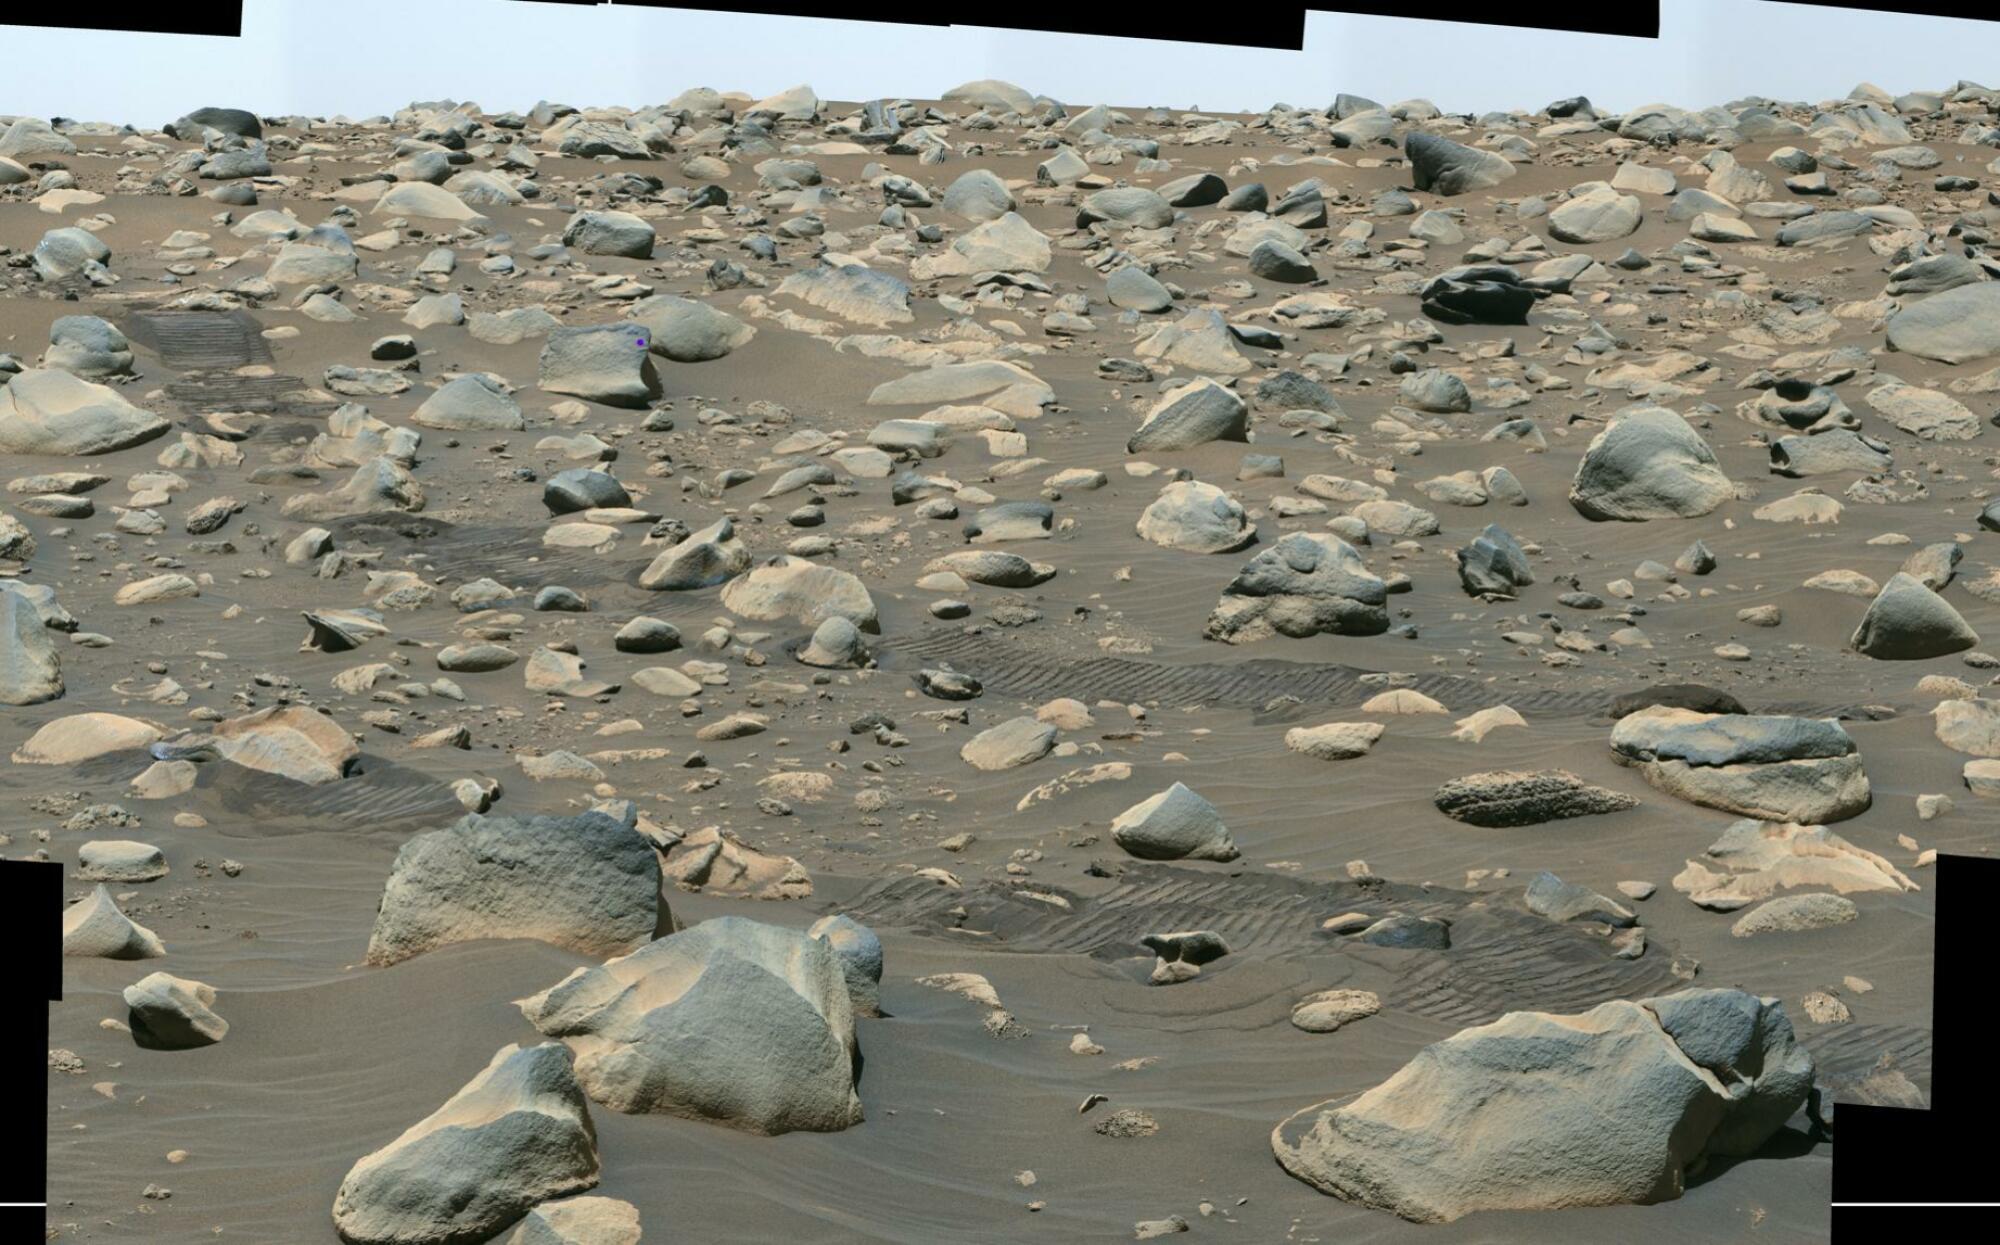 A boulder field spotted by NASA's Perseverance rover in the planet's Jezero Crater.